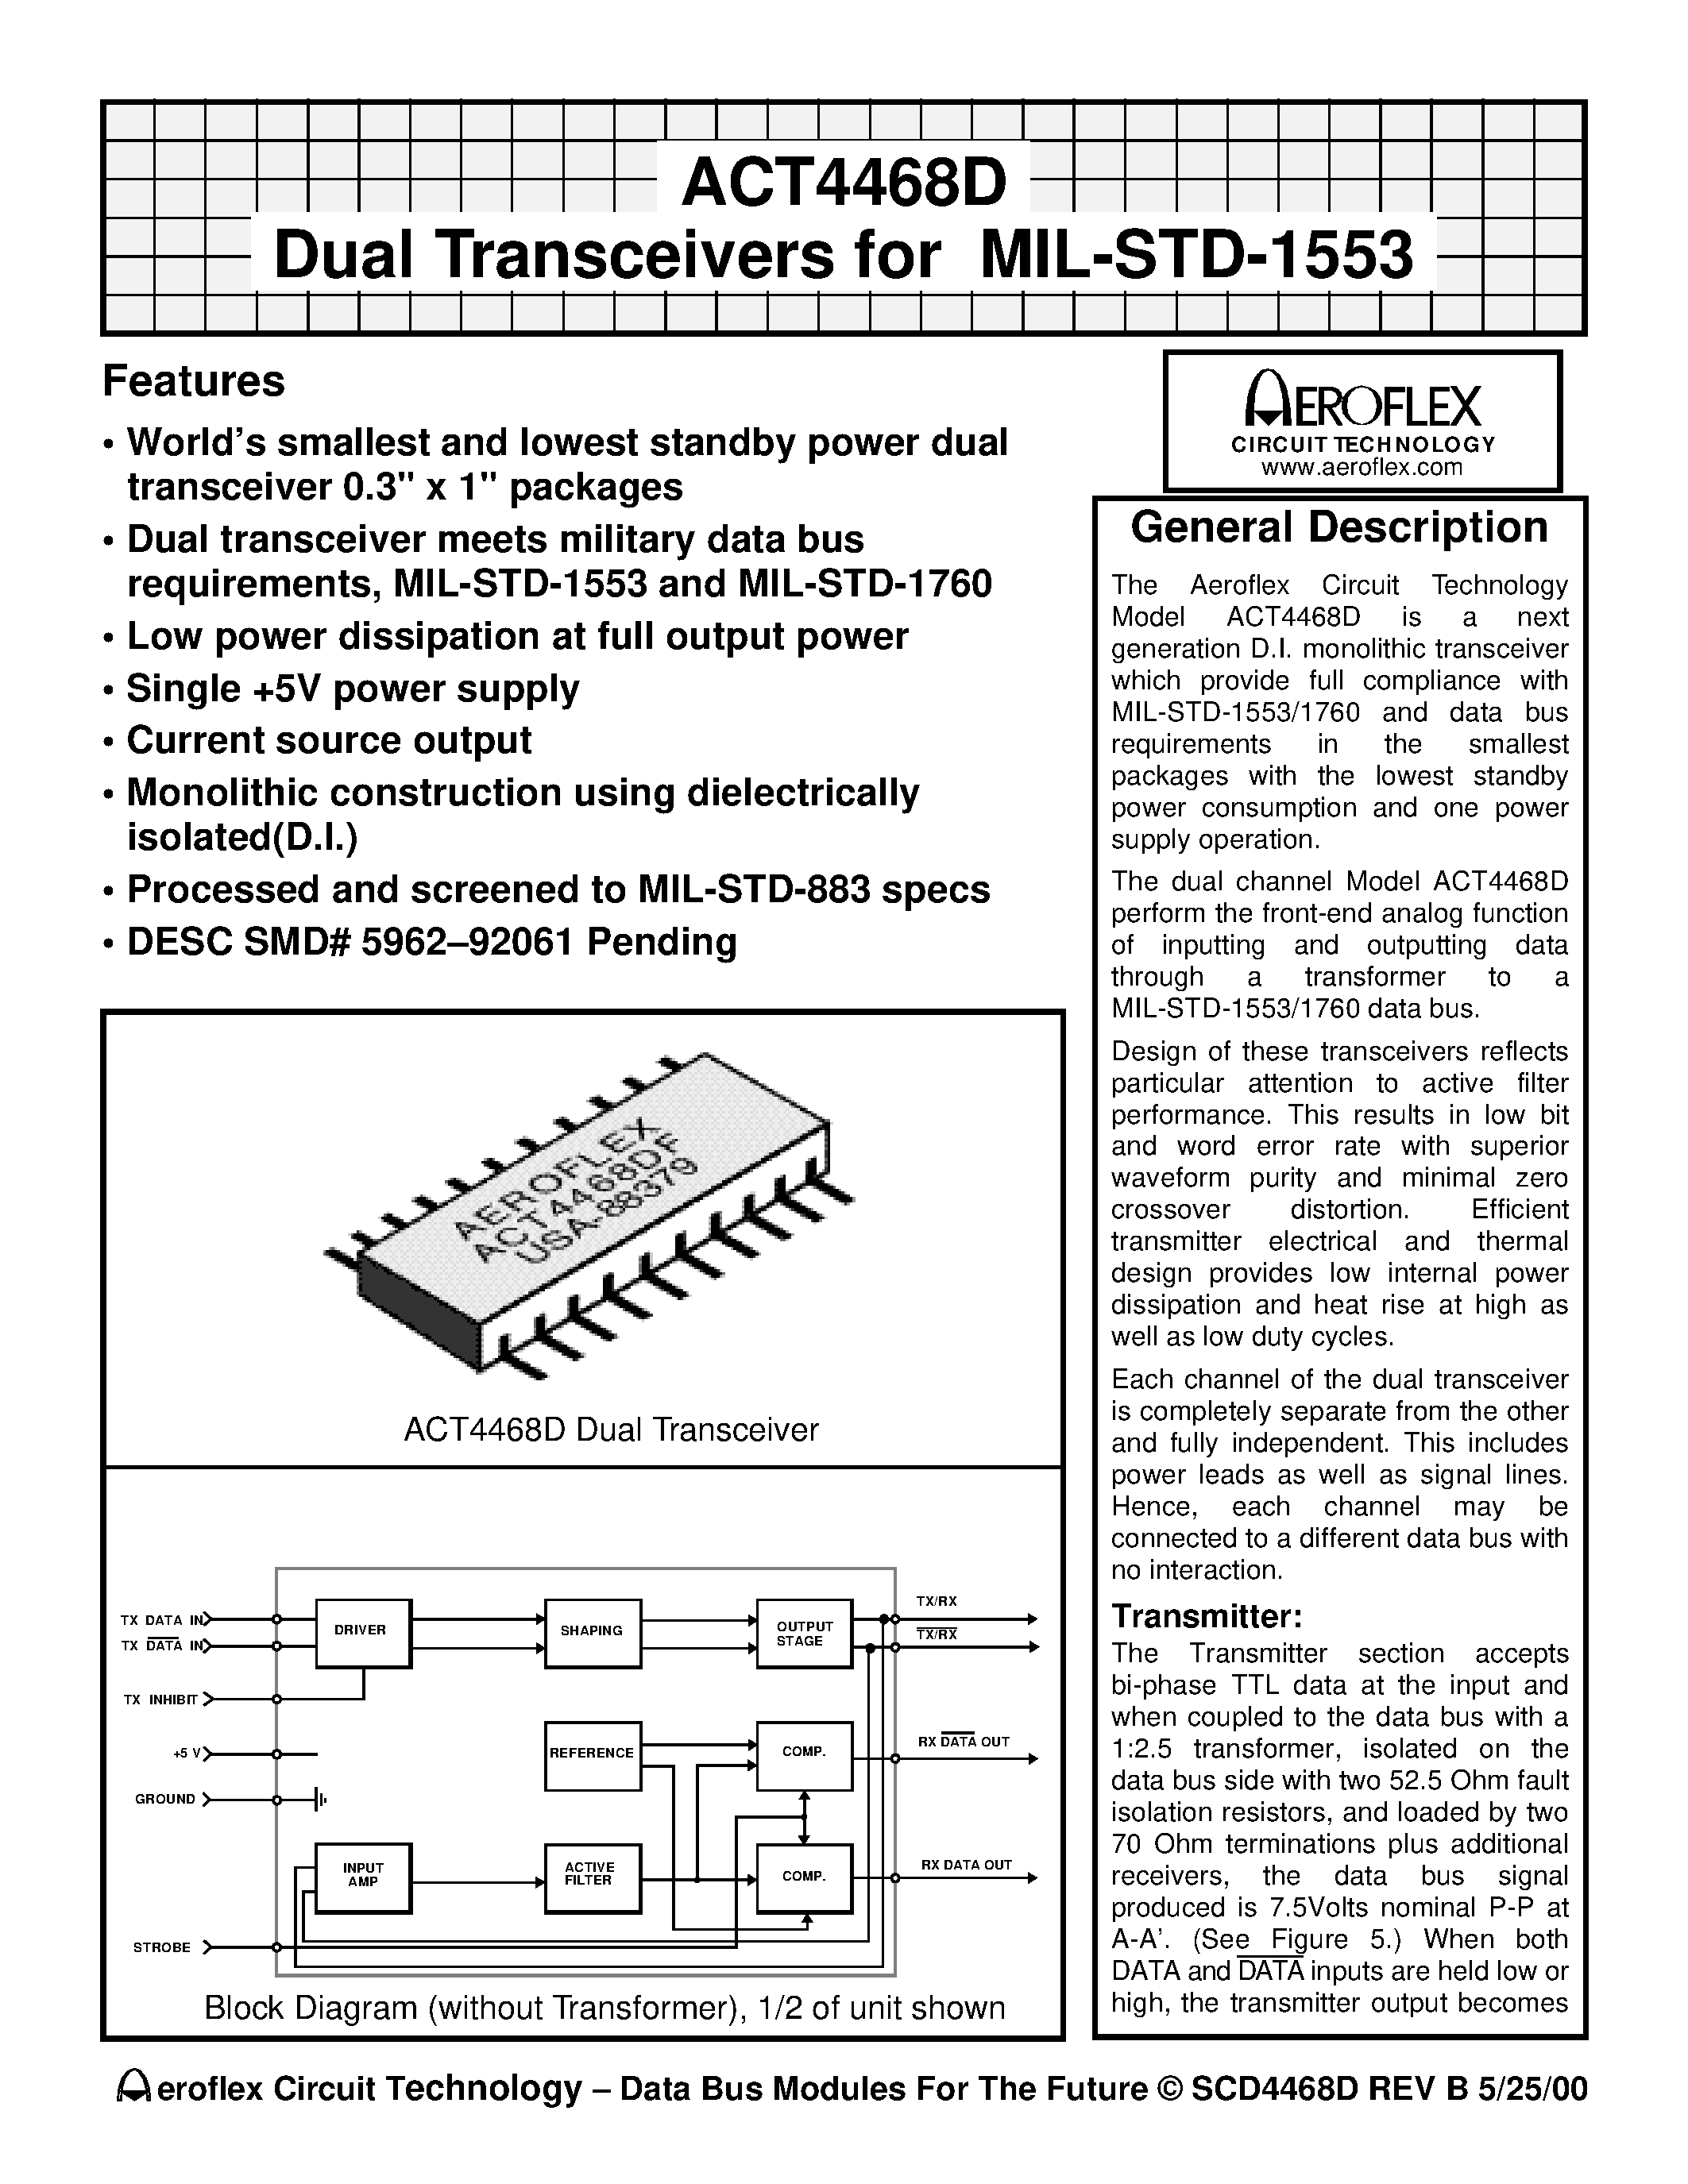 Даташит ACT4468DI - ACT4468D Dual Transceivers for MIL-STD-1553 страница 1